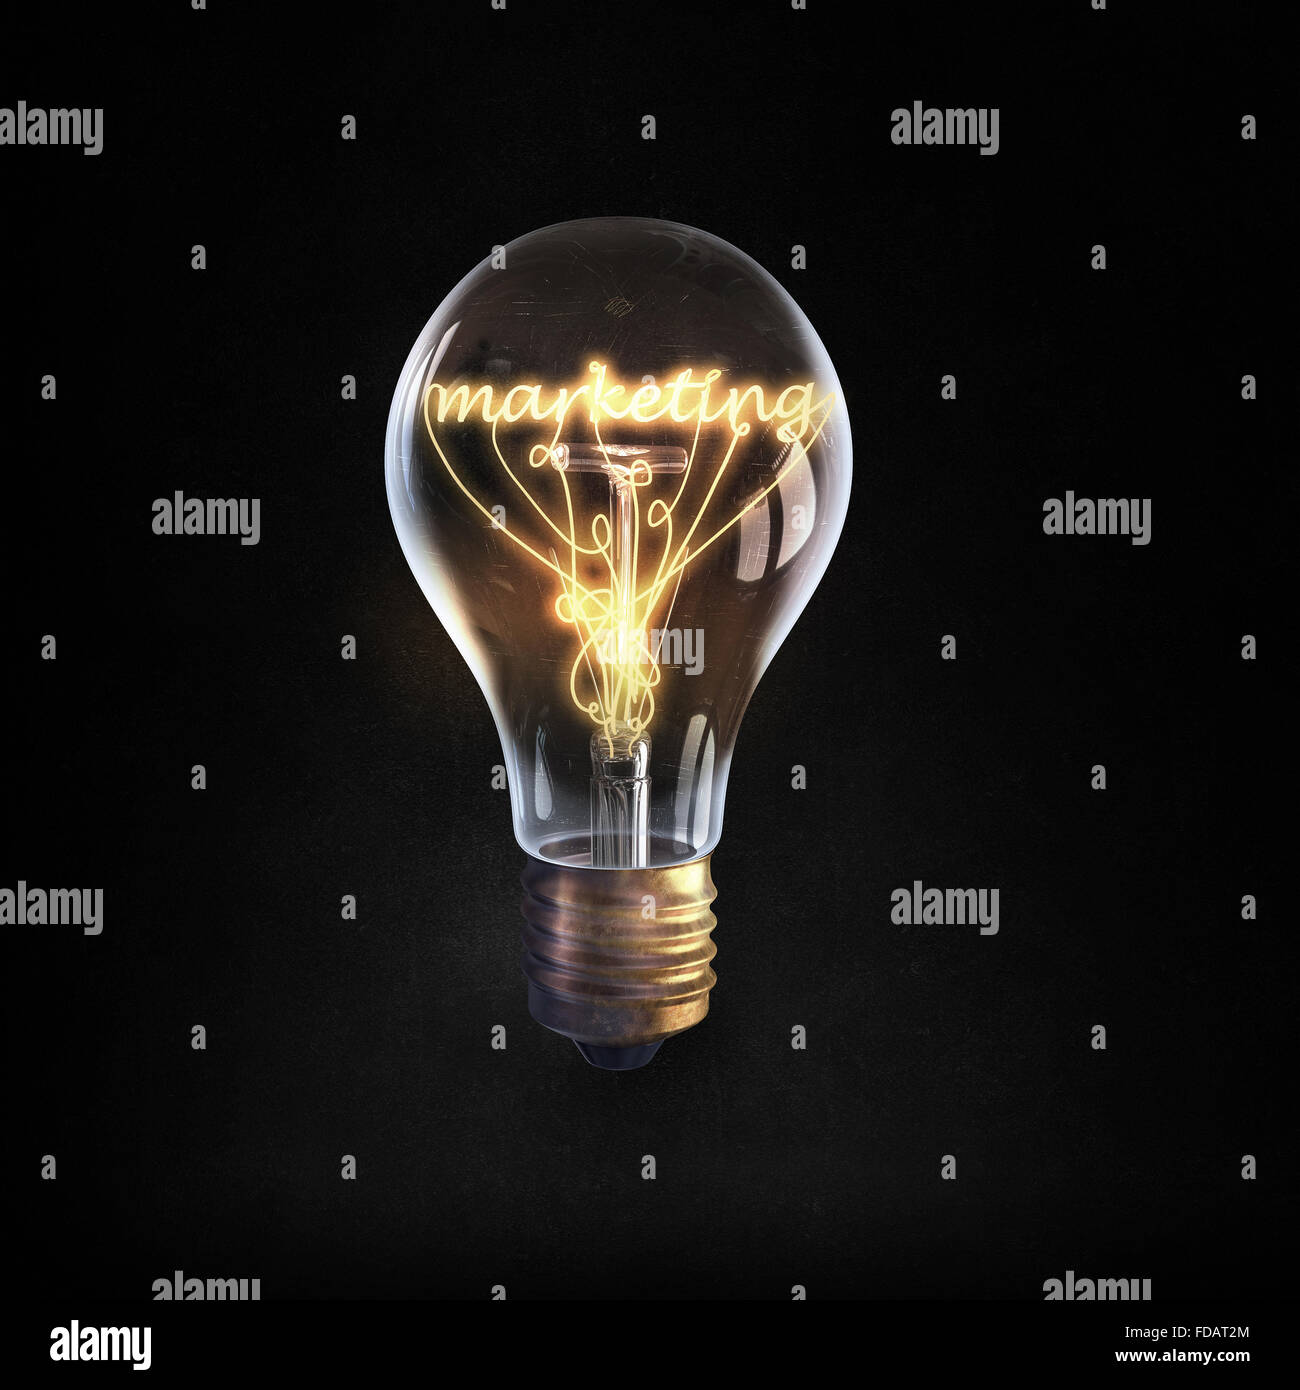 Glowing glass light bulb with marketing word inside Stock Photo